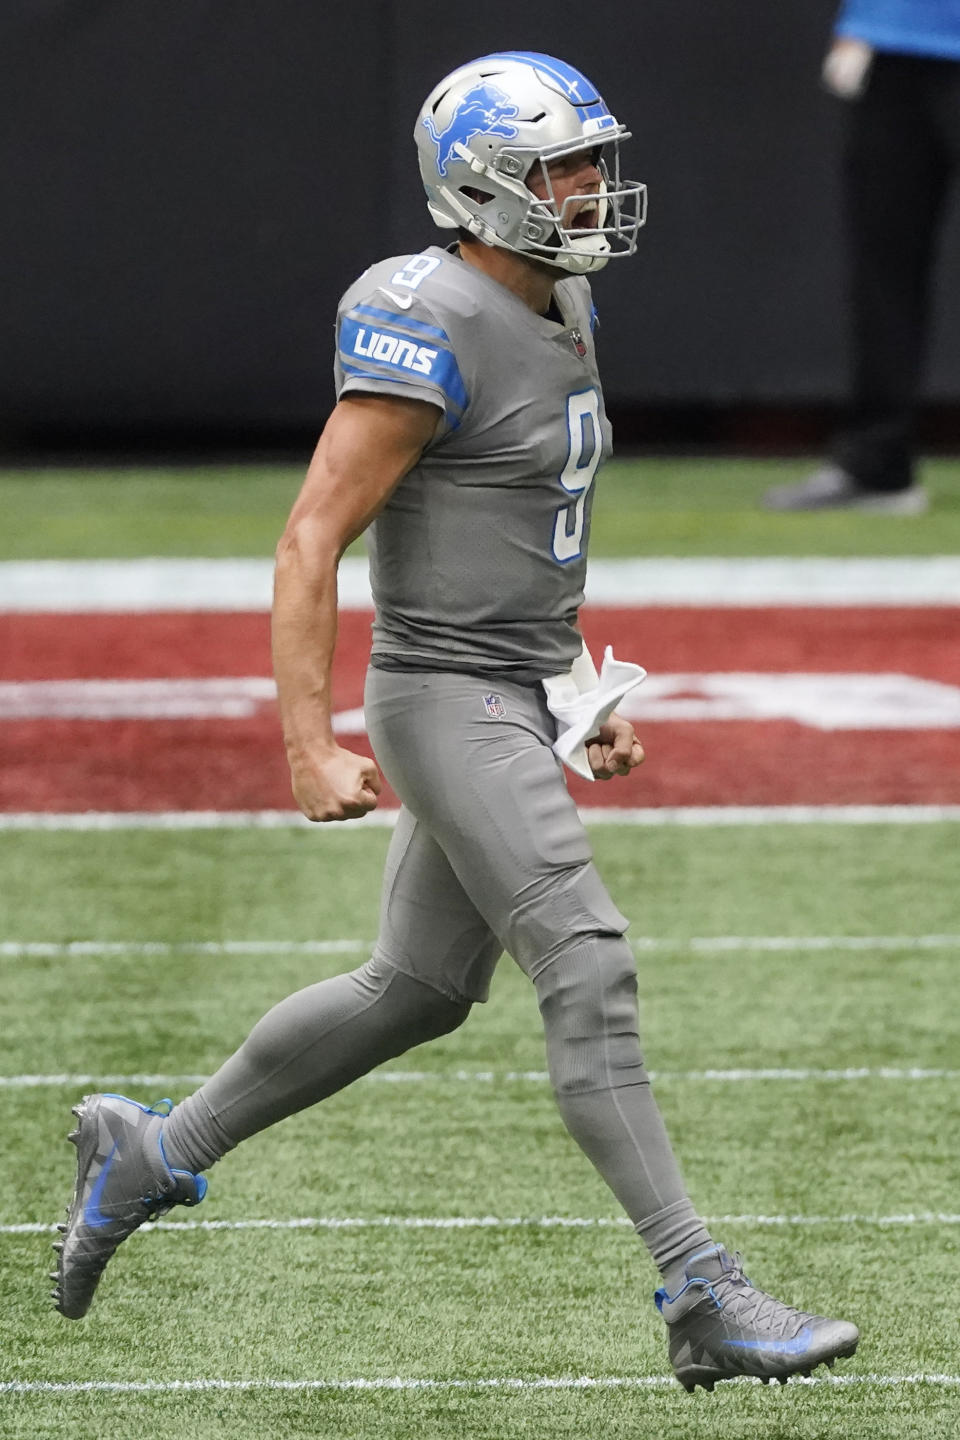 Detroit Lions quarterback Matthew Stafford (9) celebrates victory during the second half of an NFL football game against the Atlanta Falcons, Sunday, Oct. 25, 2020, in Atlanta. The Detroit Lions won 23-22. (AP Photo/John Bazemore)